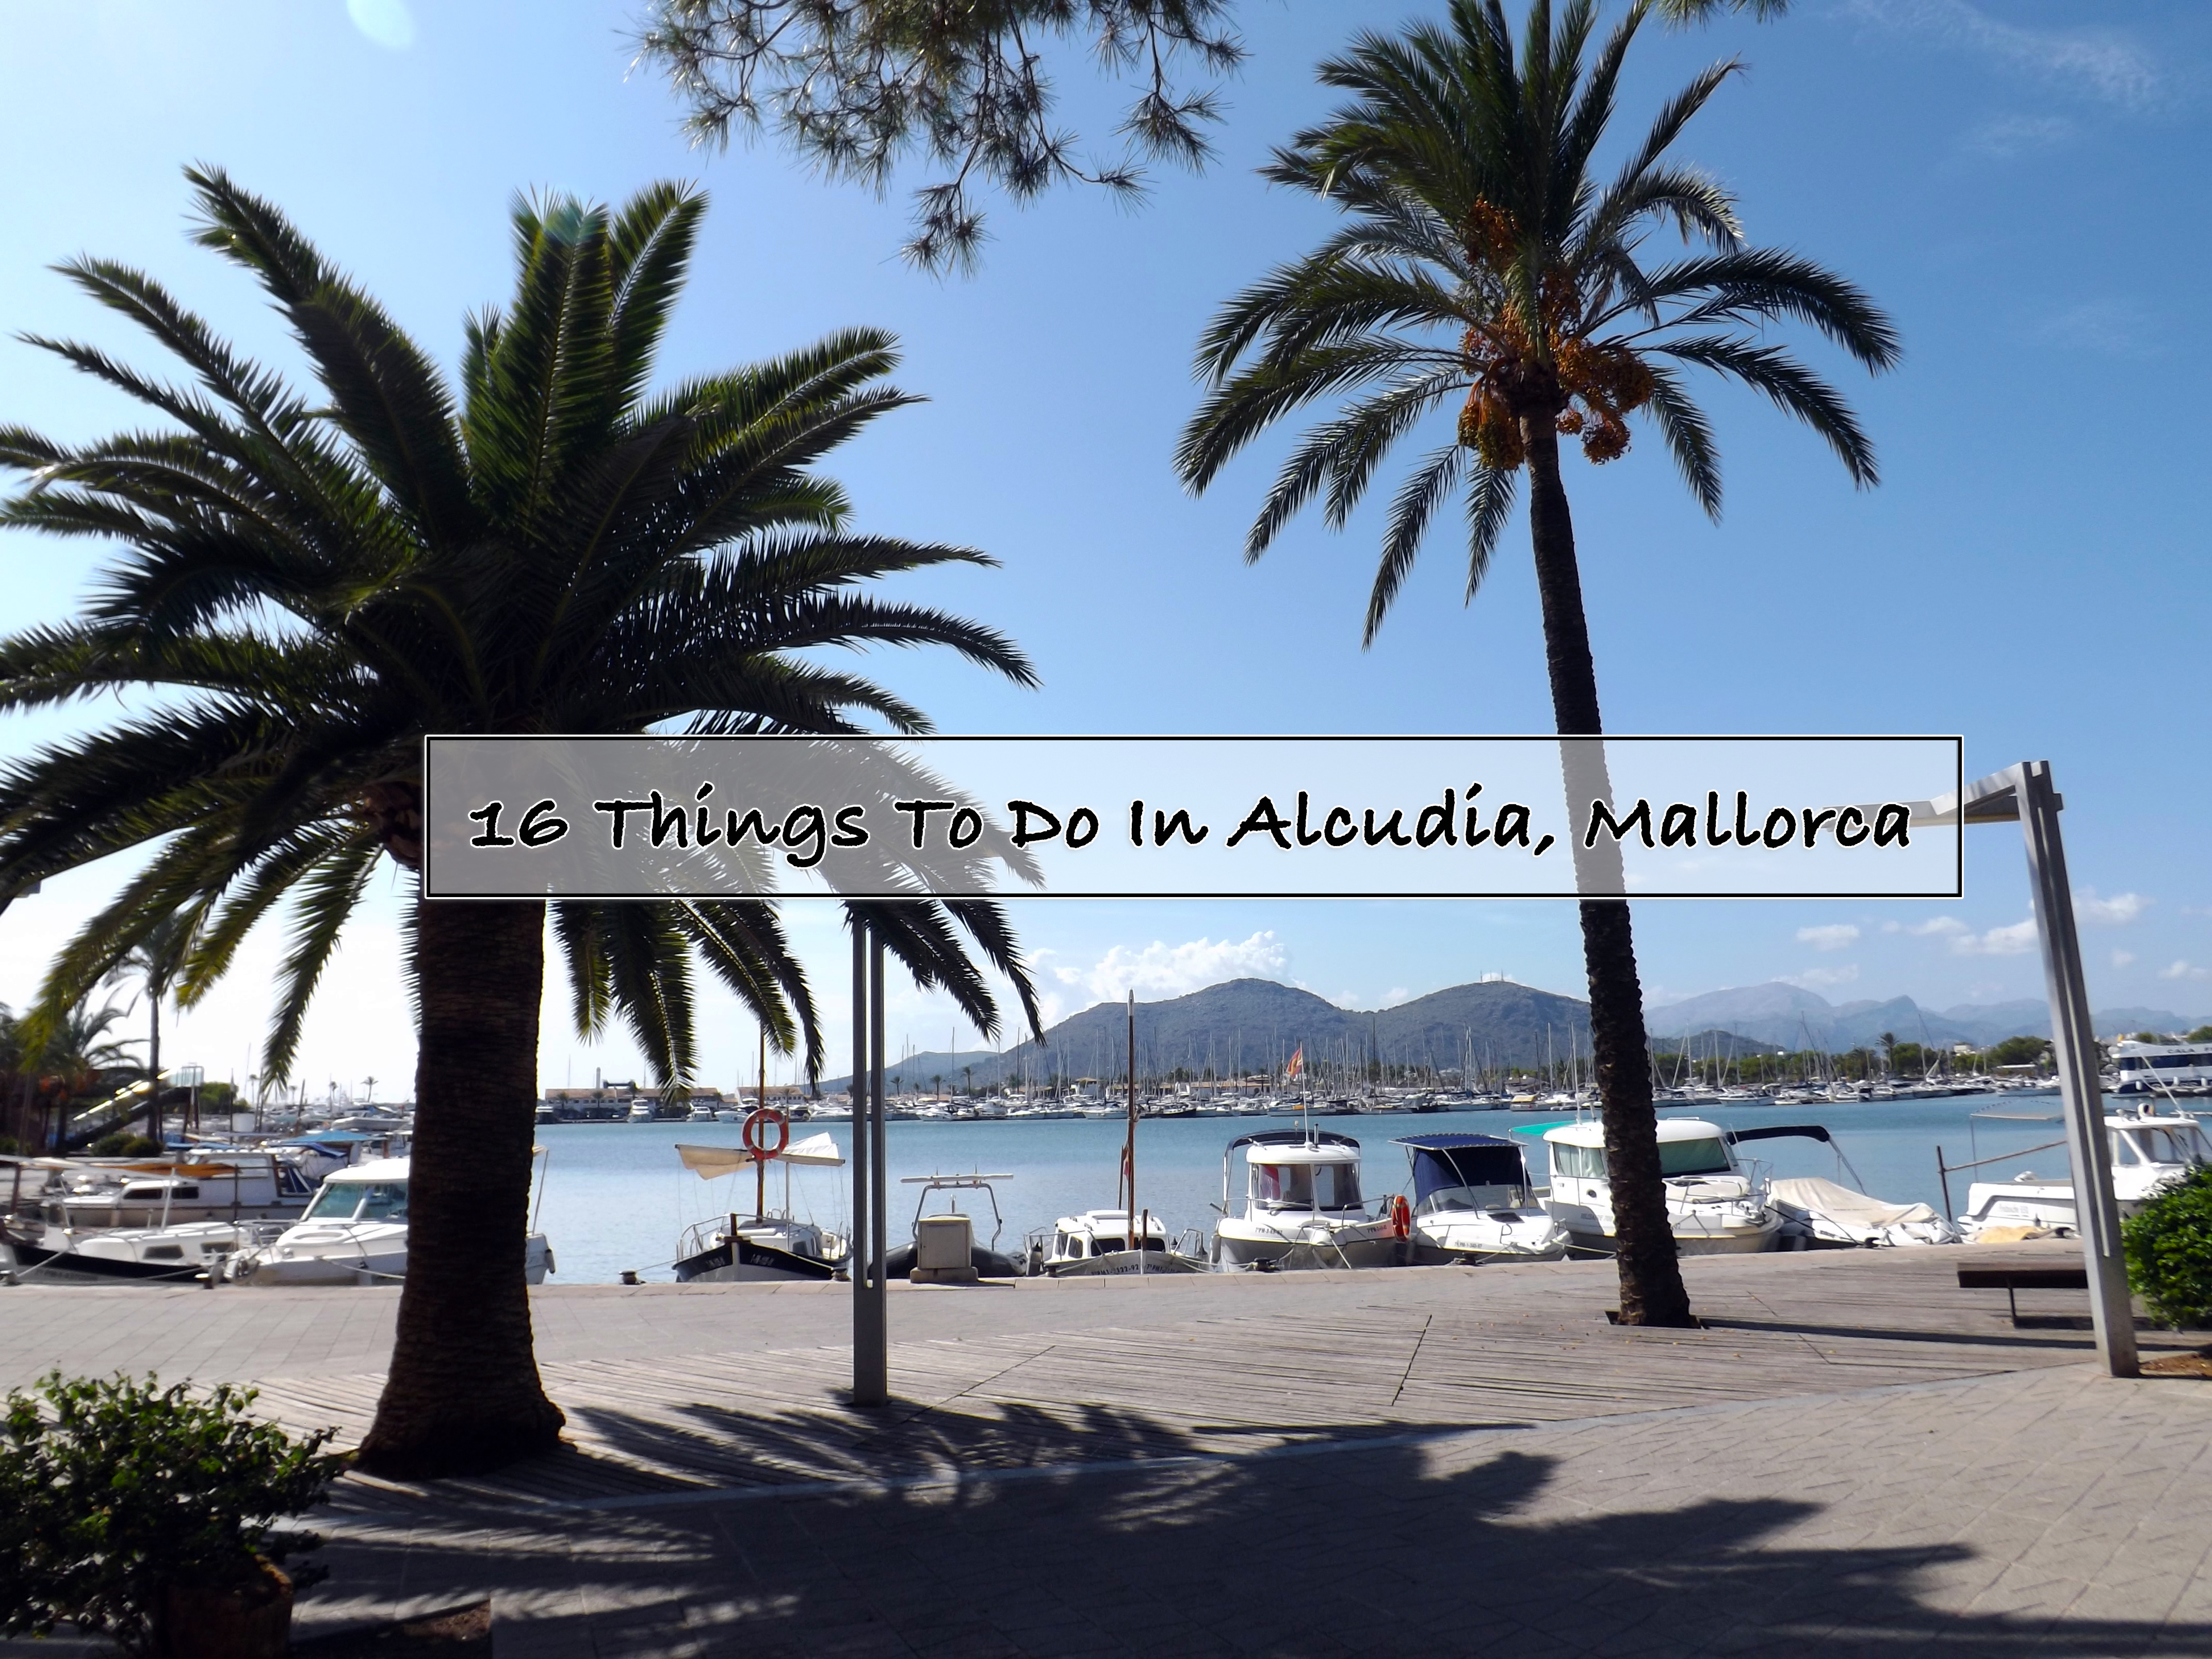 16 Things to do in Alcudia, Mallorca Blog Post - one Epic Road Trip Blog